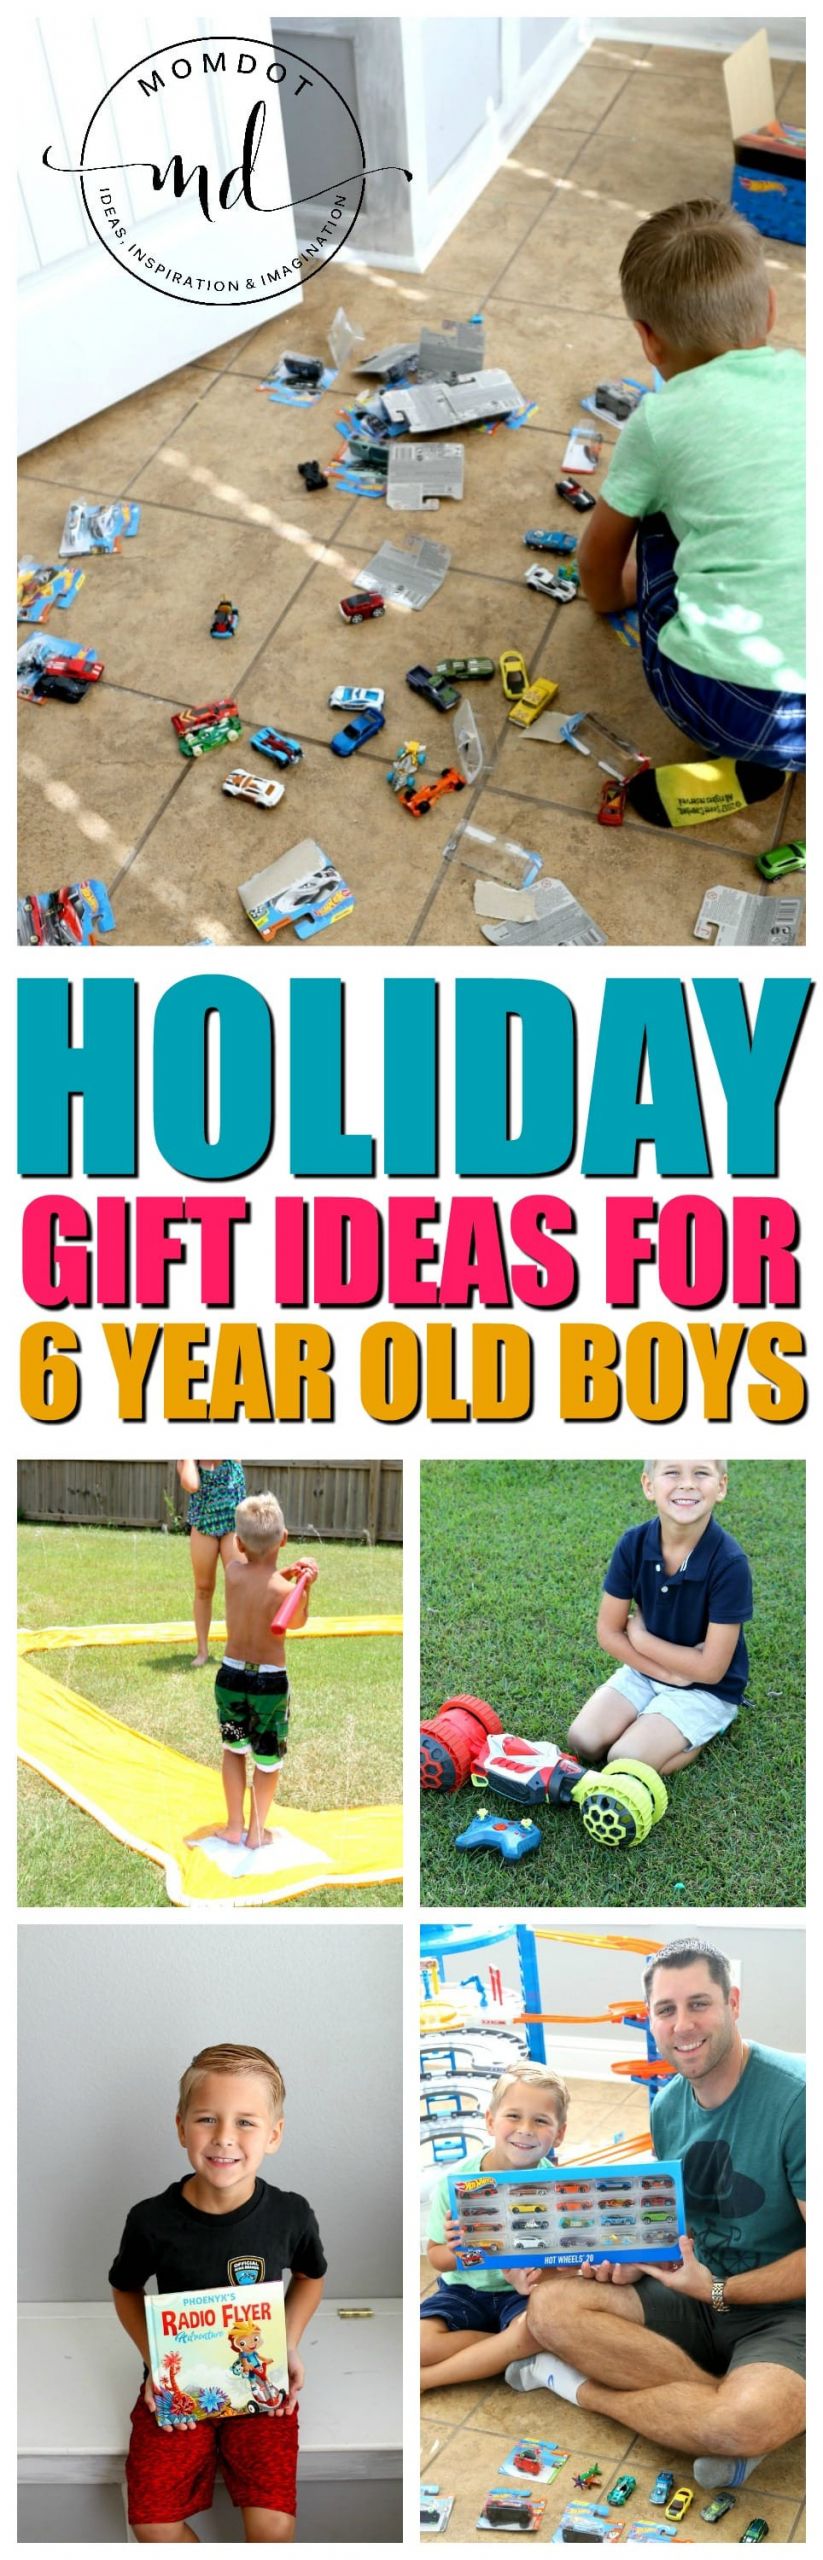 Gift Ideas For 6 Year Old Boys
 Gift Ideas for 6 Year Old Boys